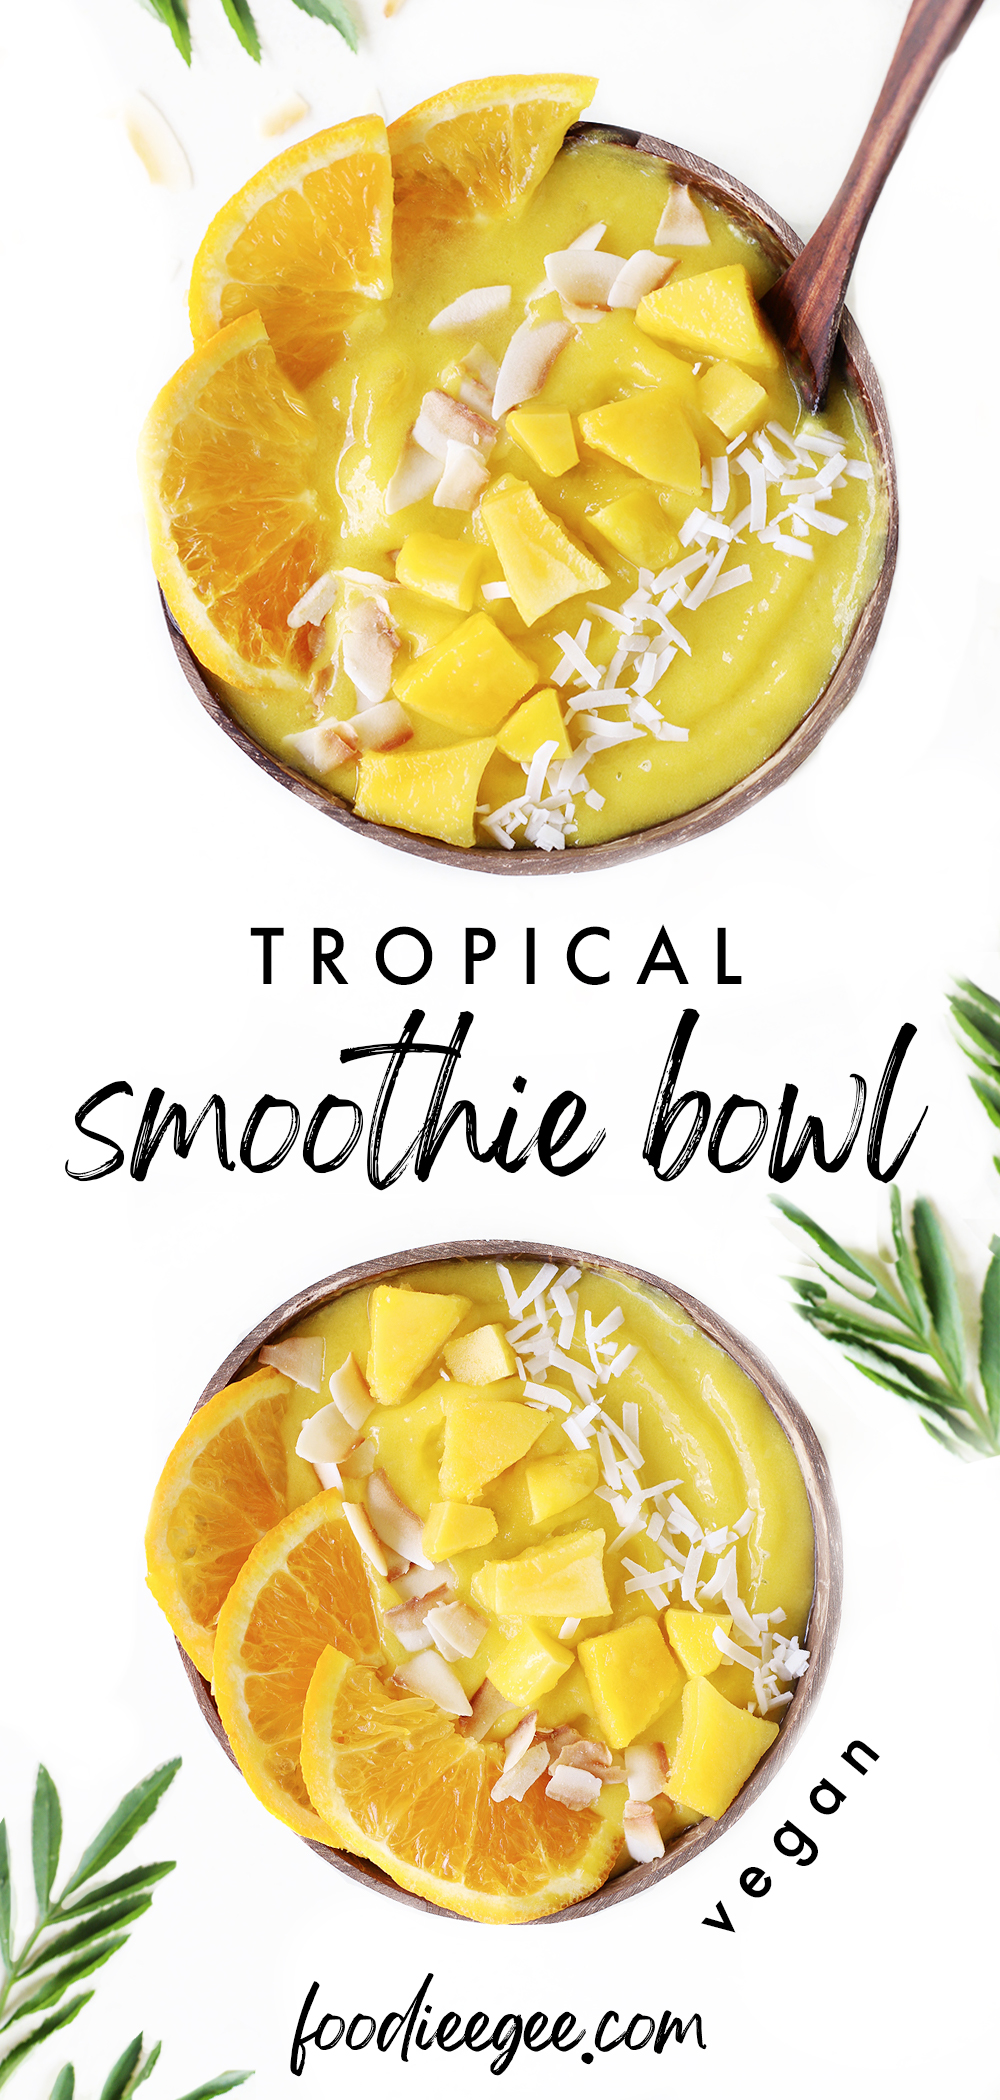 Vegan tropical pineapple mango smoothie bowl in a coconut bowl (without banana) orange slices, toasted coconut flakes and palm leaves for an easy healthy summer breakfast.